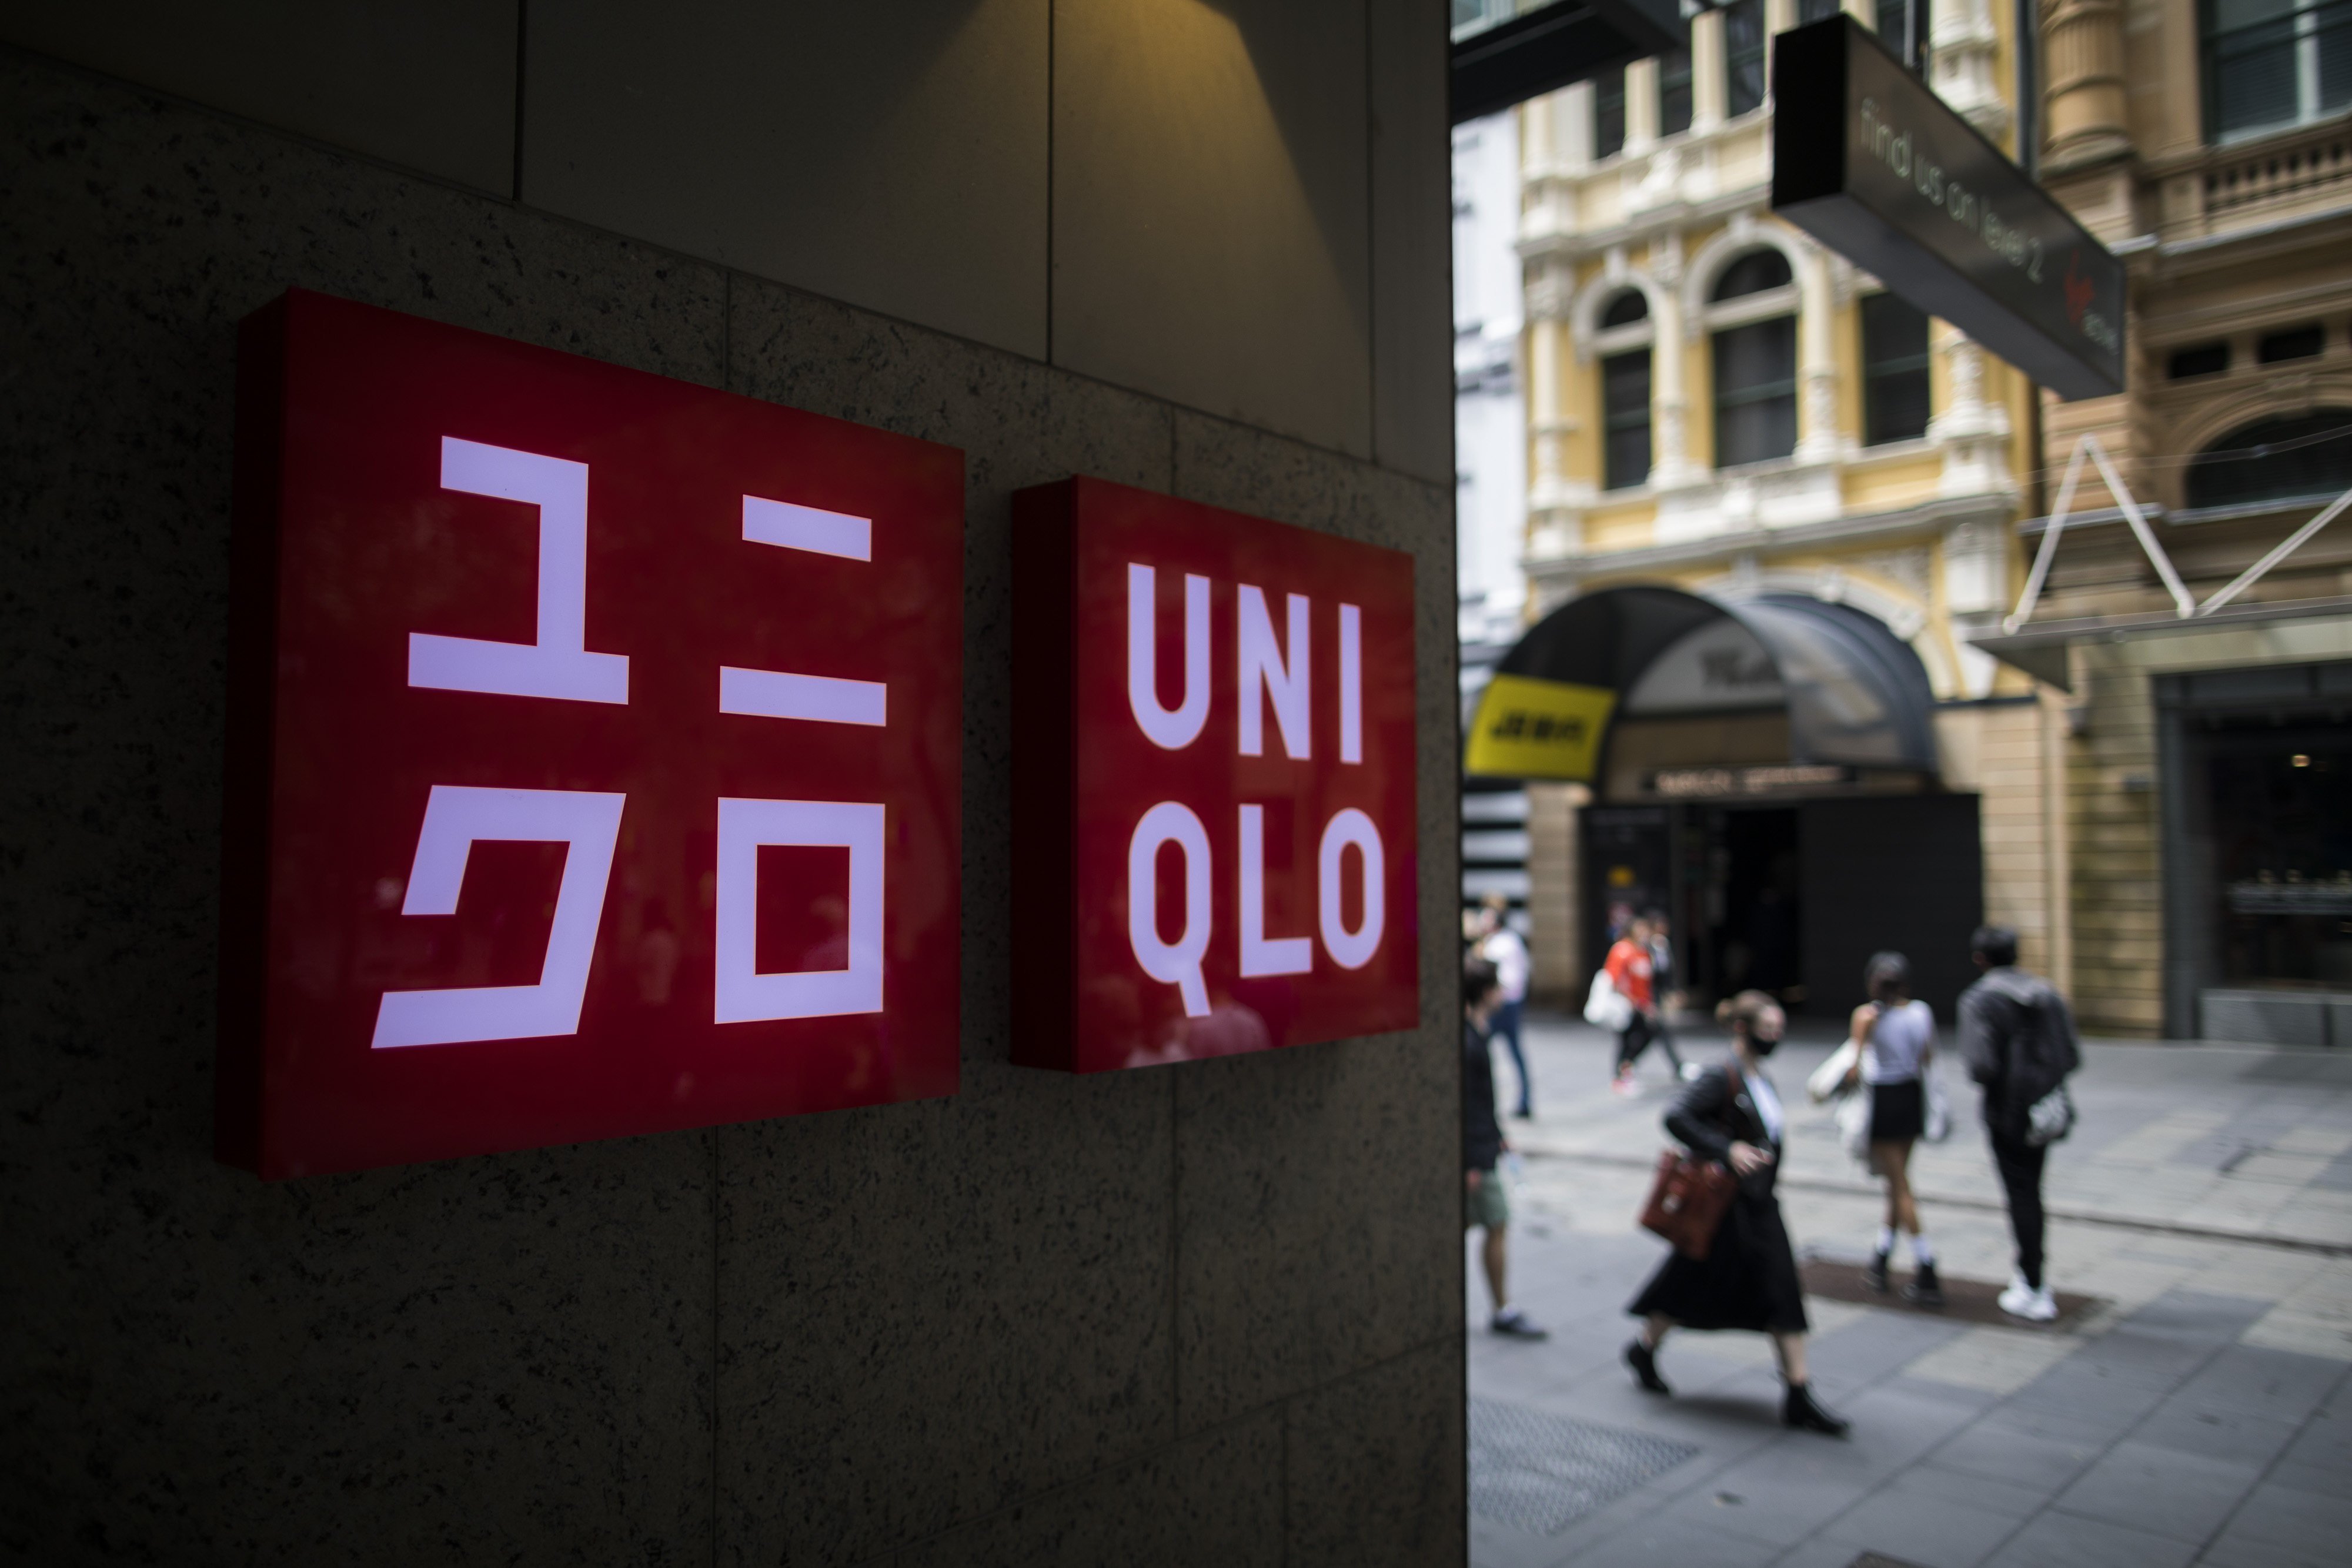 UNIQLO to close Japan's first global flagship store in Osaka